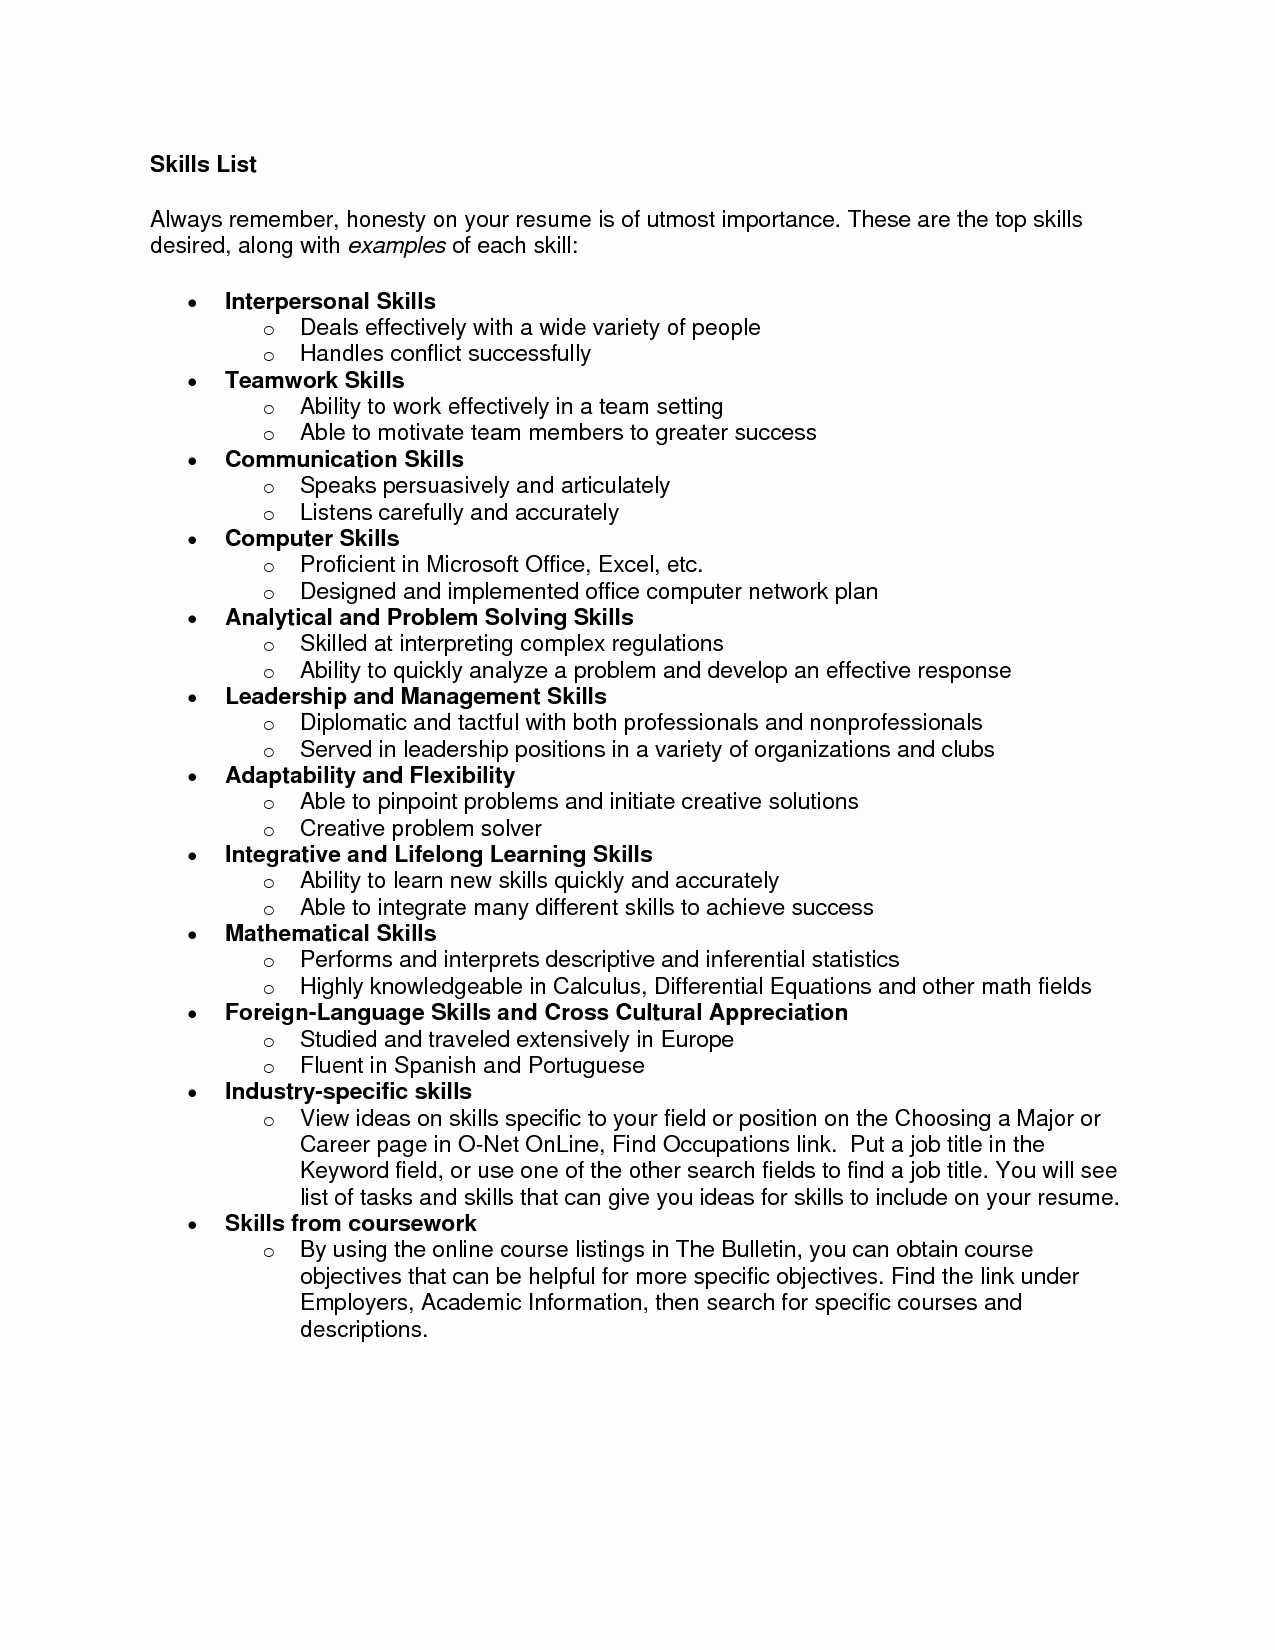 List Of Skills and Experience Examples Resume Skills